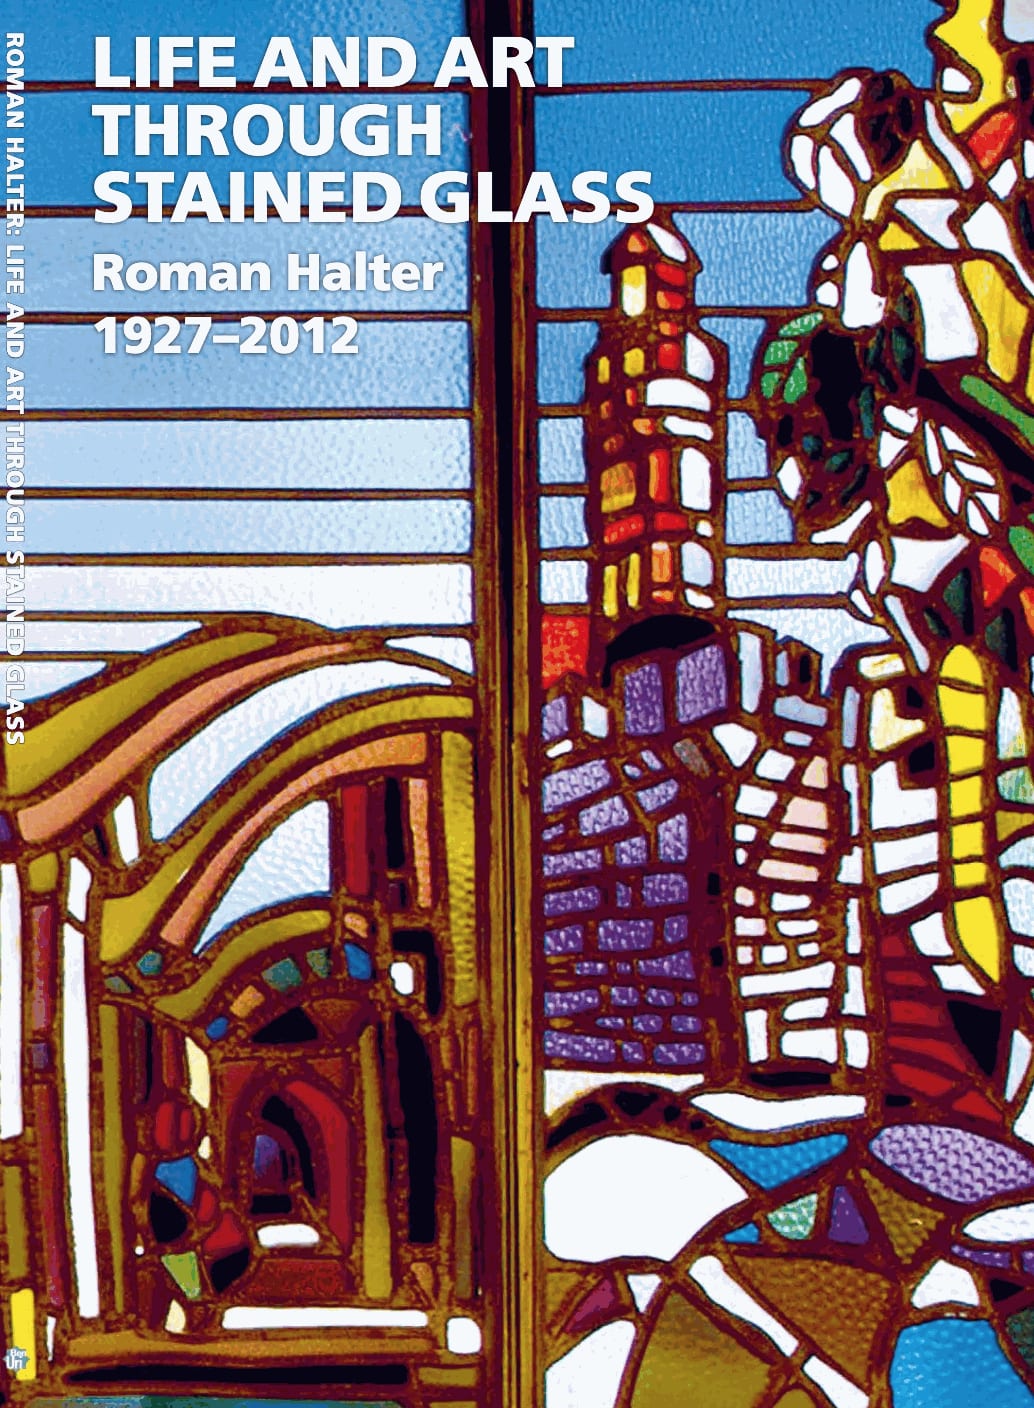 Roman Halter: Life and Art through Stained Glass Read it here